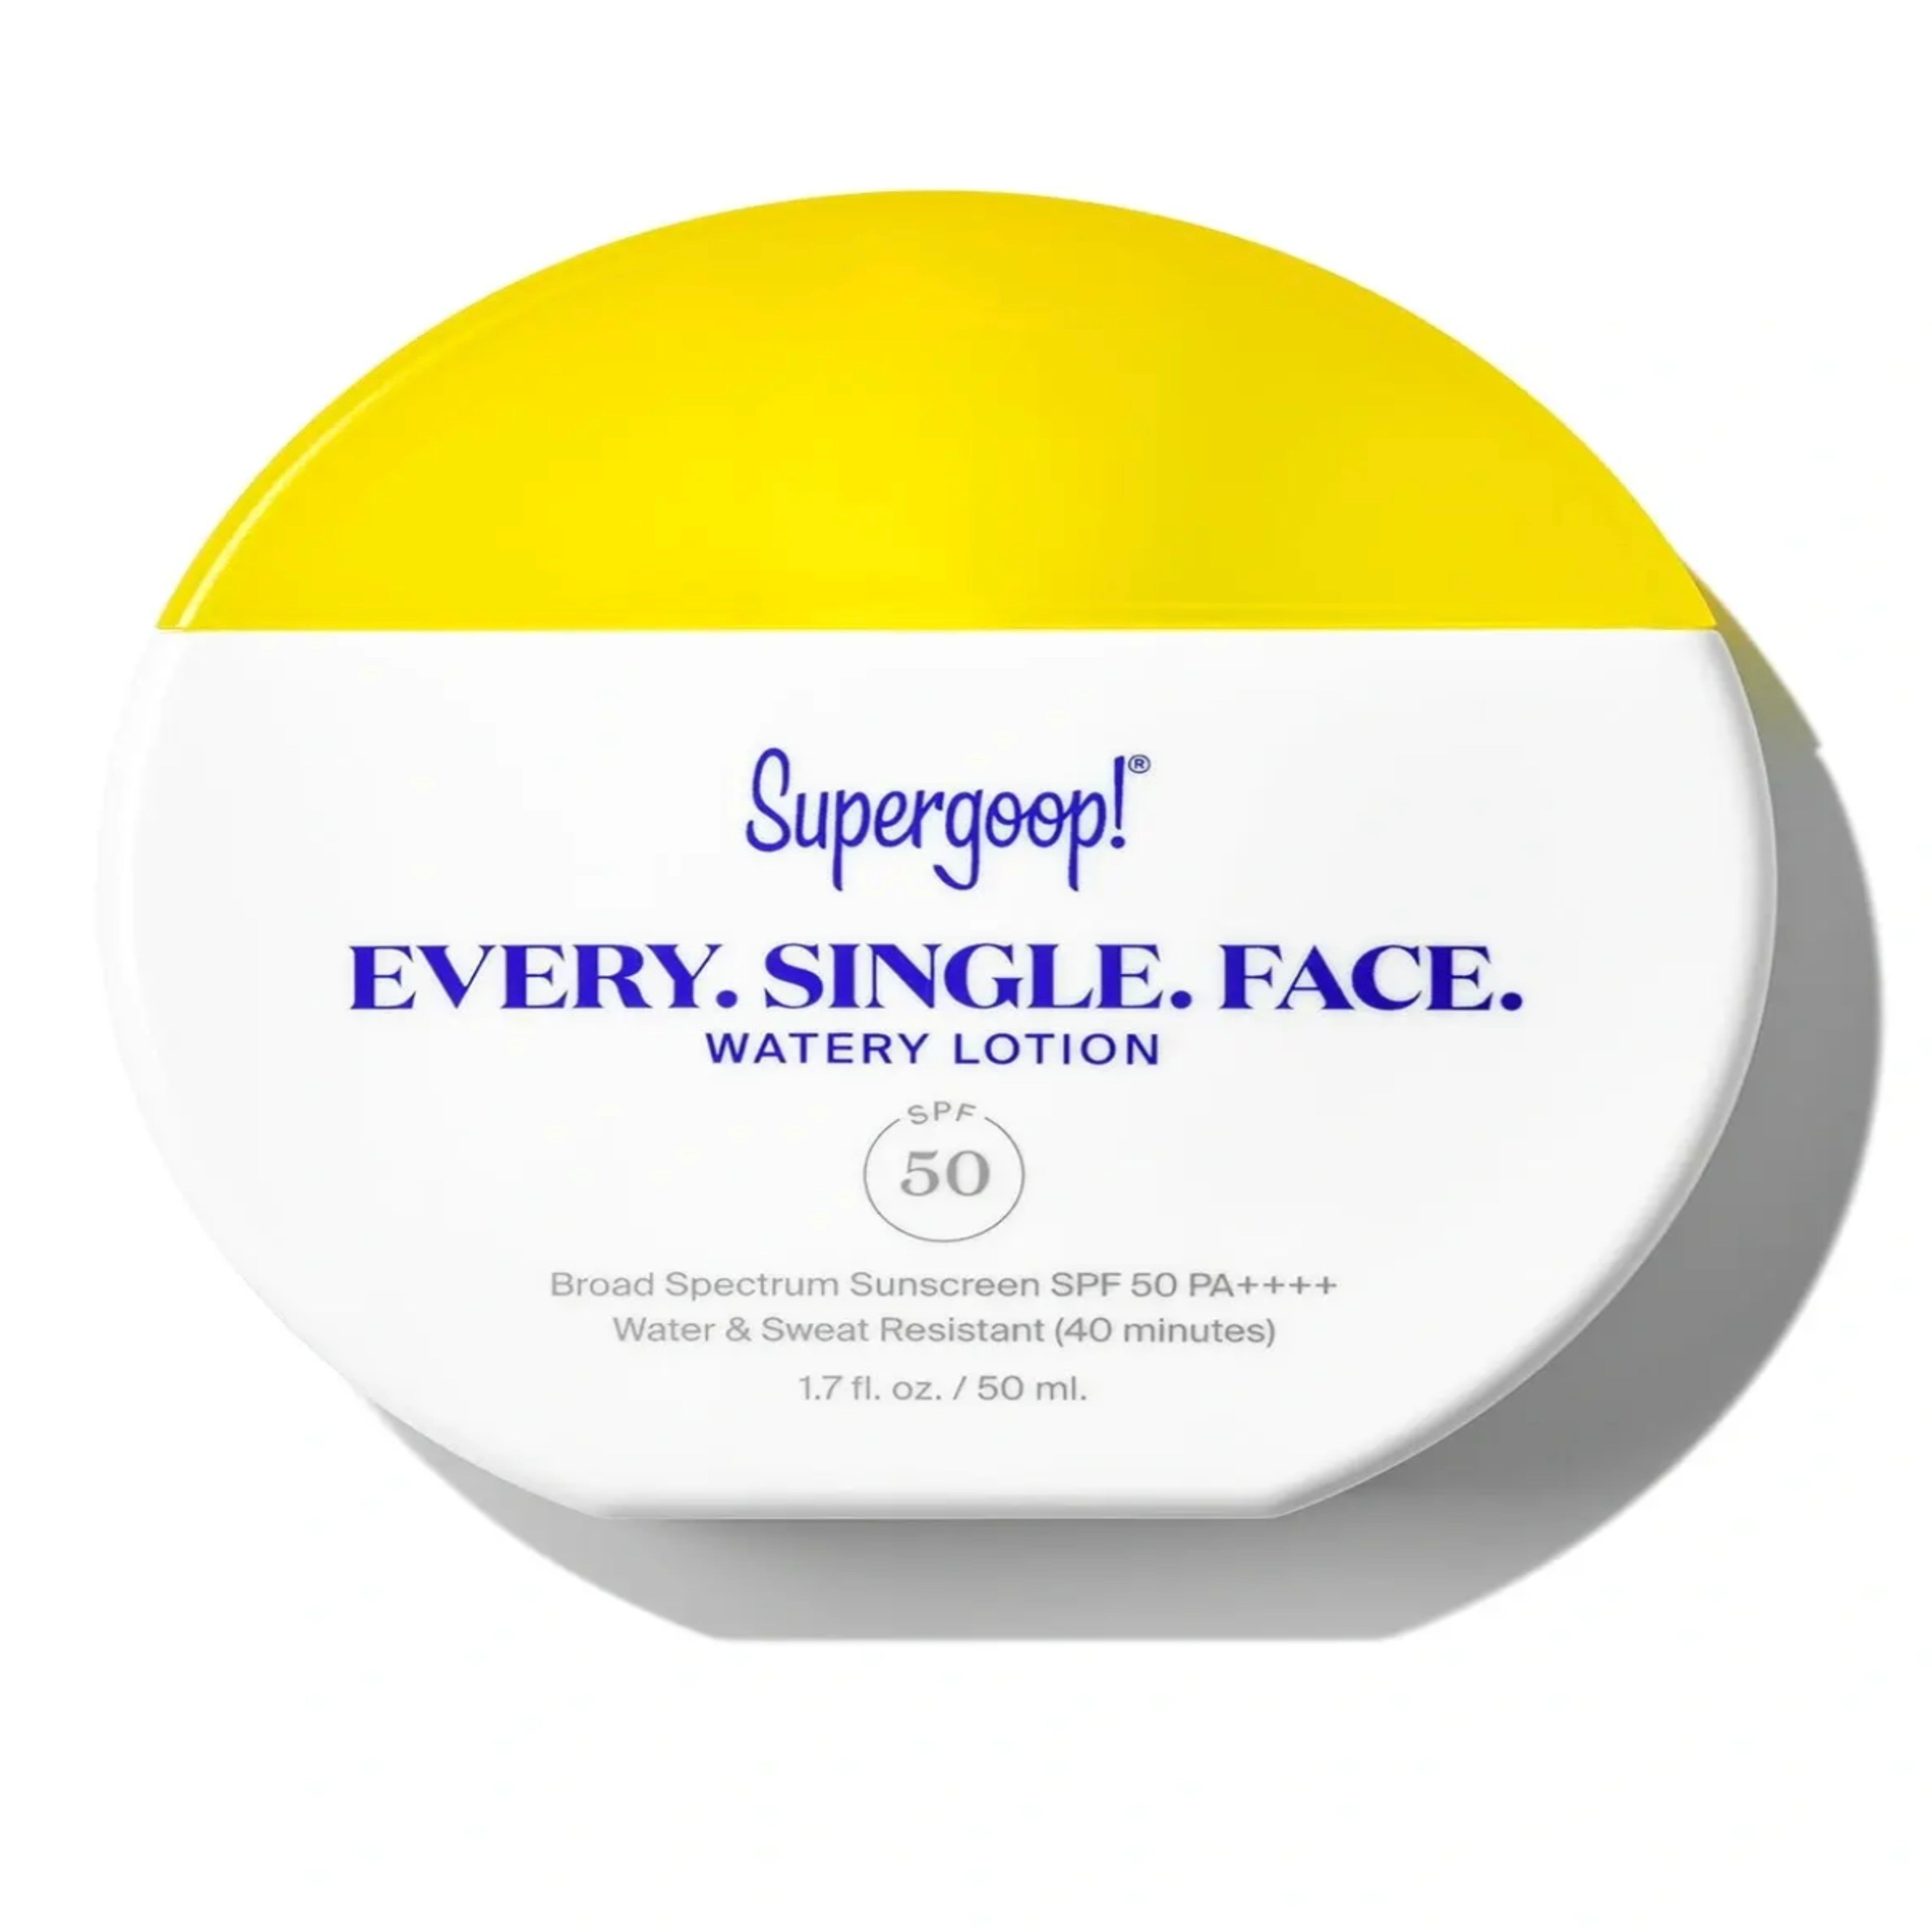 Supergoop! Every. Single. Face. Watery Lotion SPF 50 1.7 oz